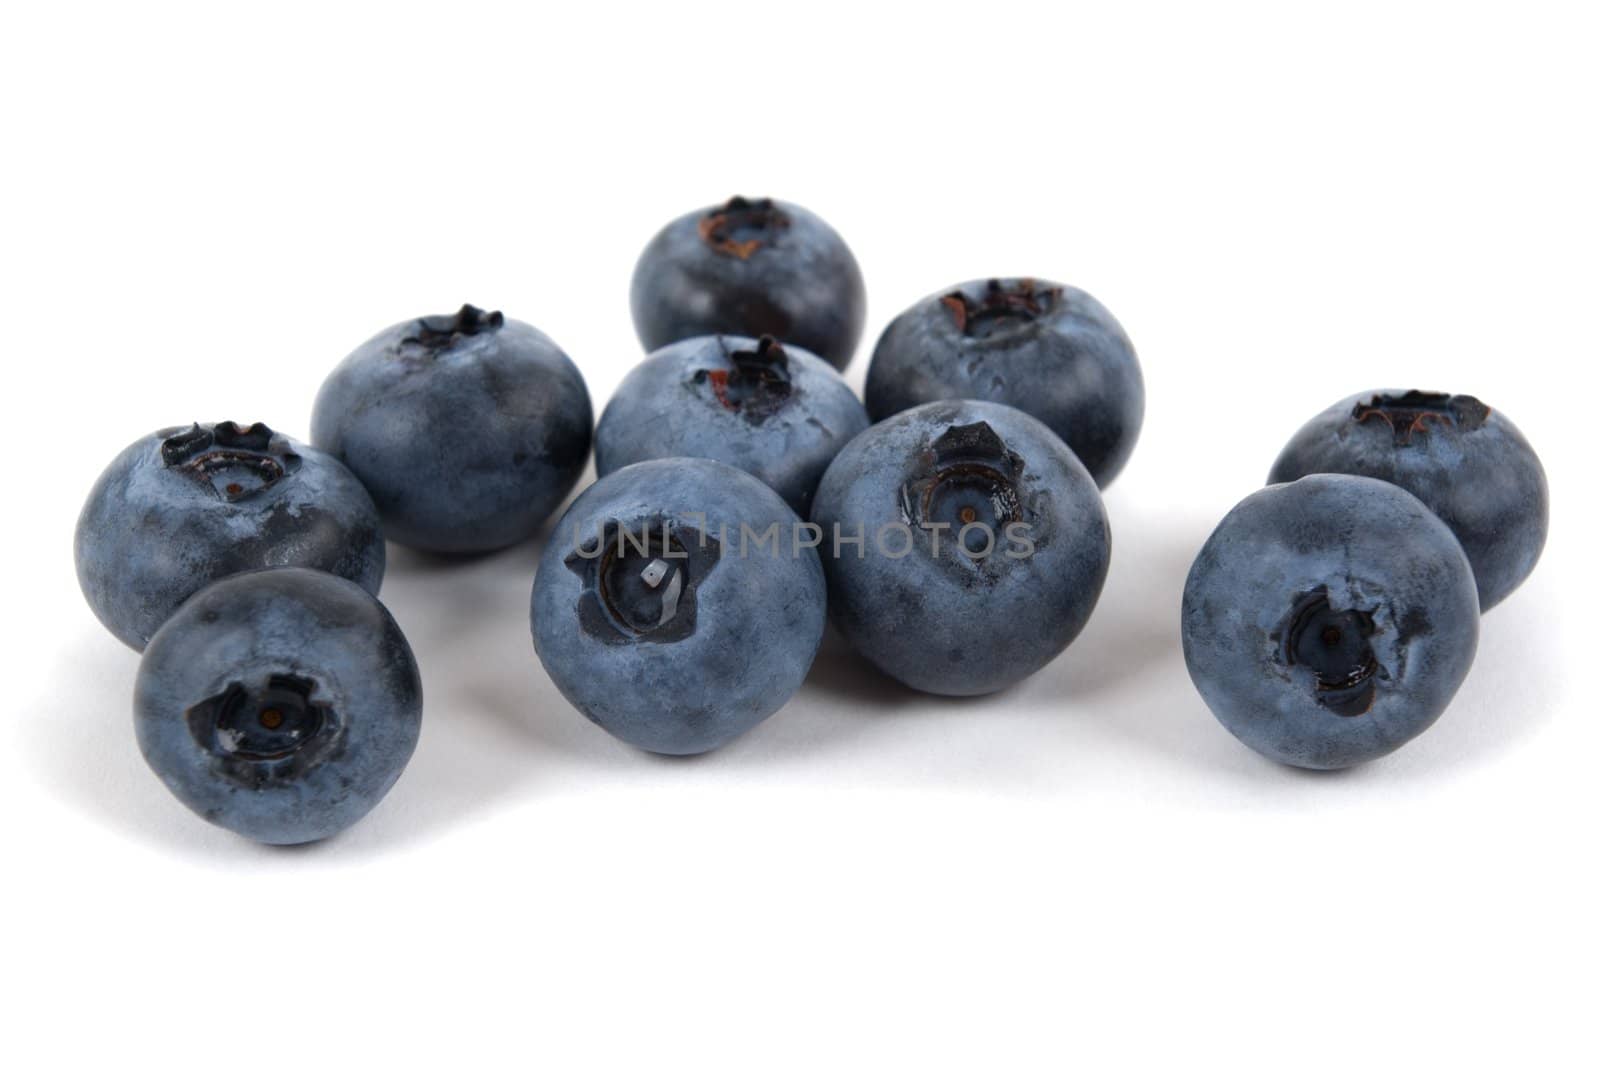 Blueberries by BVDC